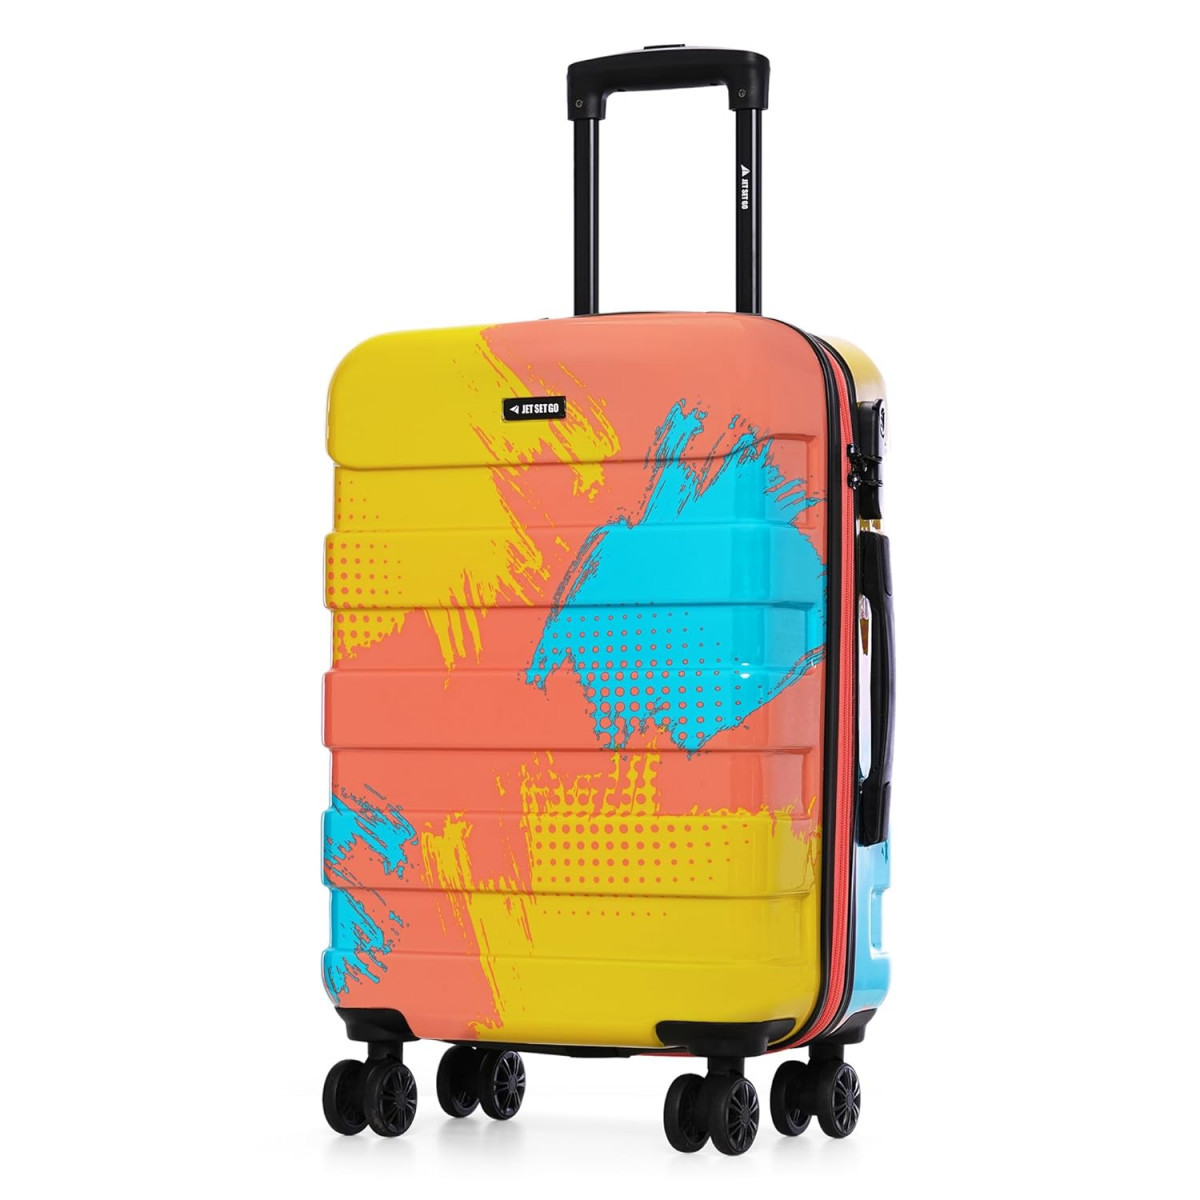 Nasher Miles Limited Edition Jet Set Go Real Hard-Sided Polycarbonate Printed Cabin Luggage Peach Yellow 20 inch 55cm Trolley Bag Suitcase